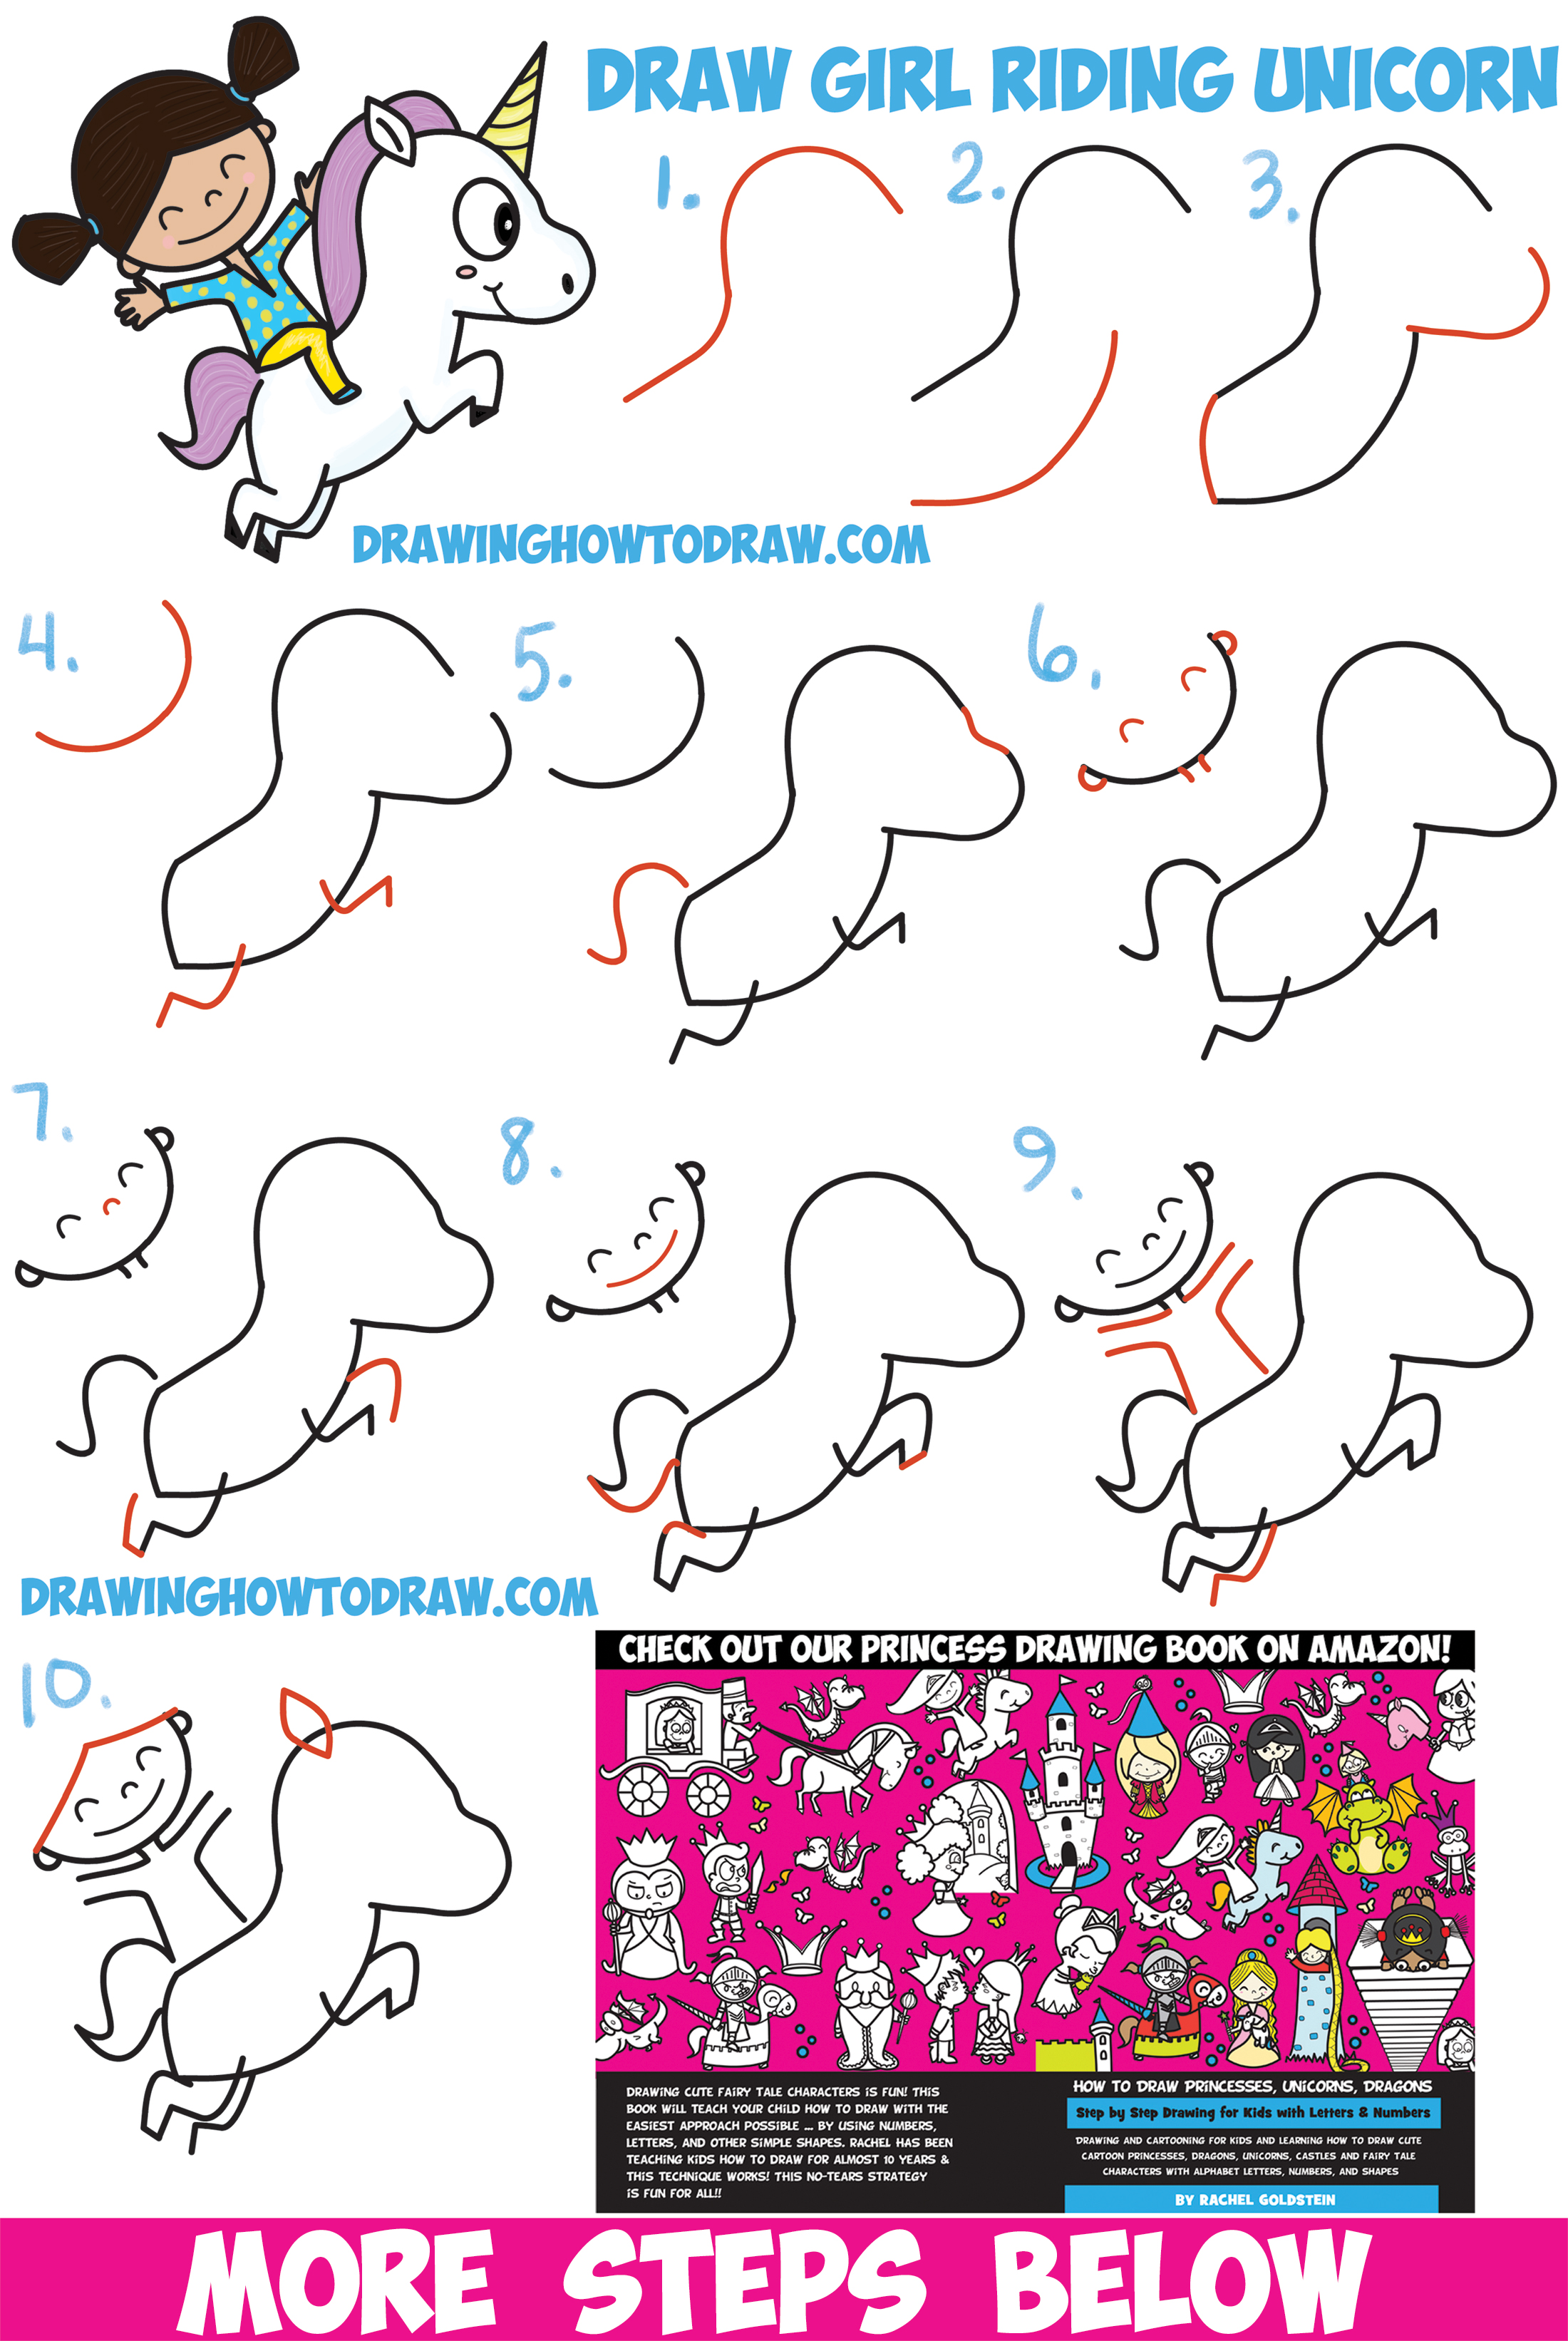 How to Draw a Cute Kawaii / Chibi Girl Riding a Unicorn in Easy Step by Step Drawing Tutorial for Kids and Beginners